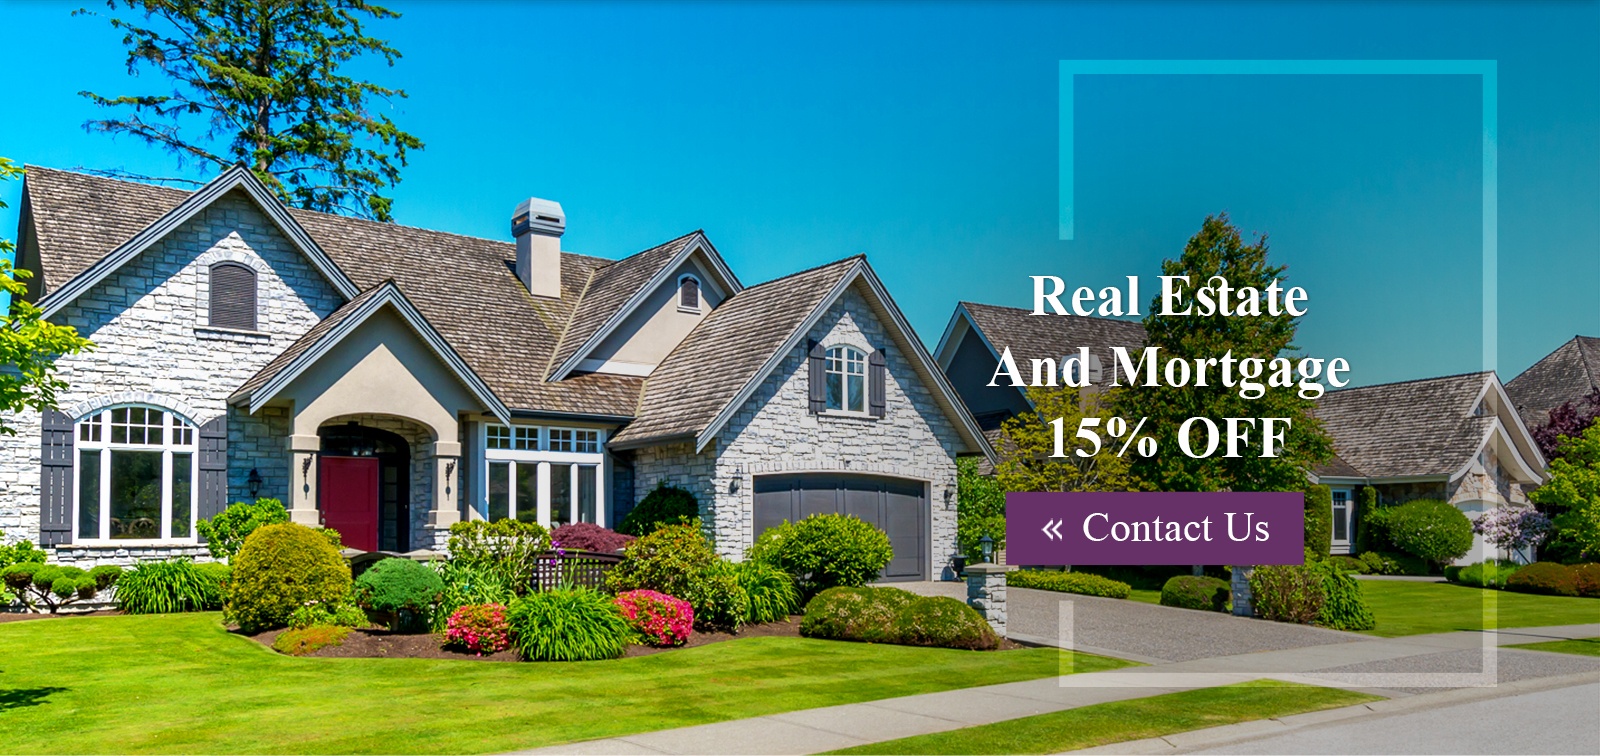 Real Estate and Mortgage